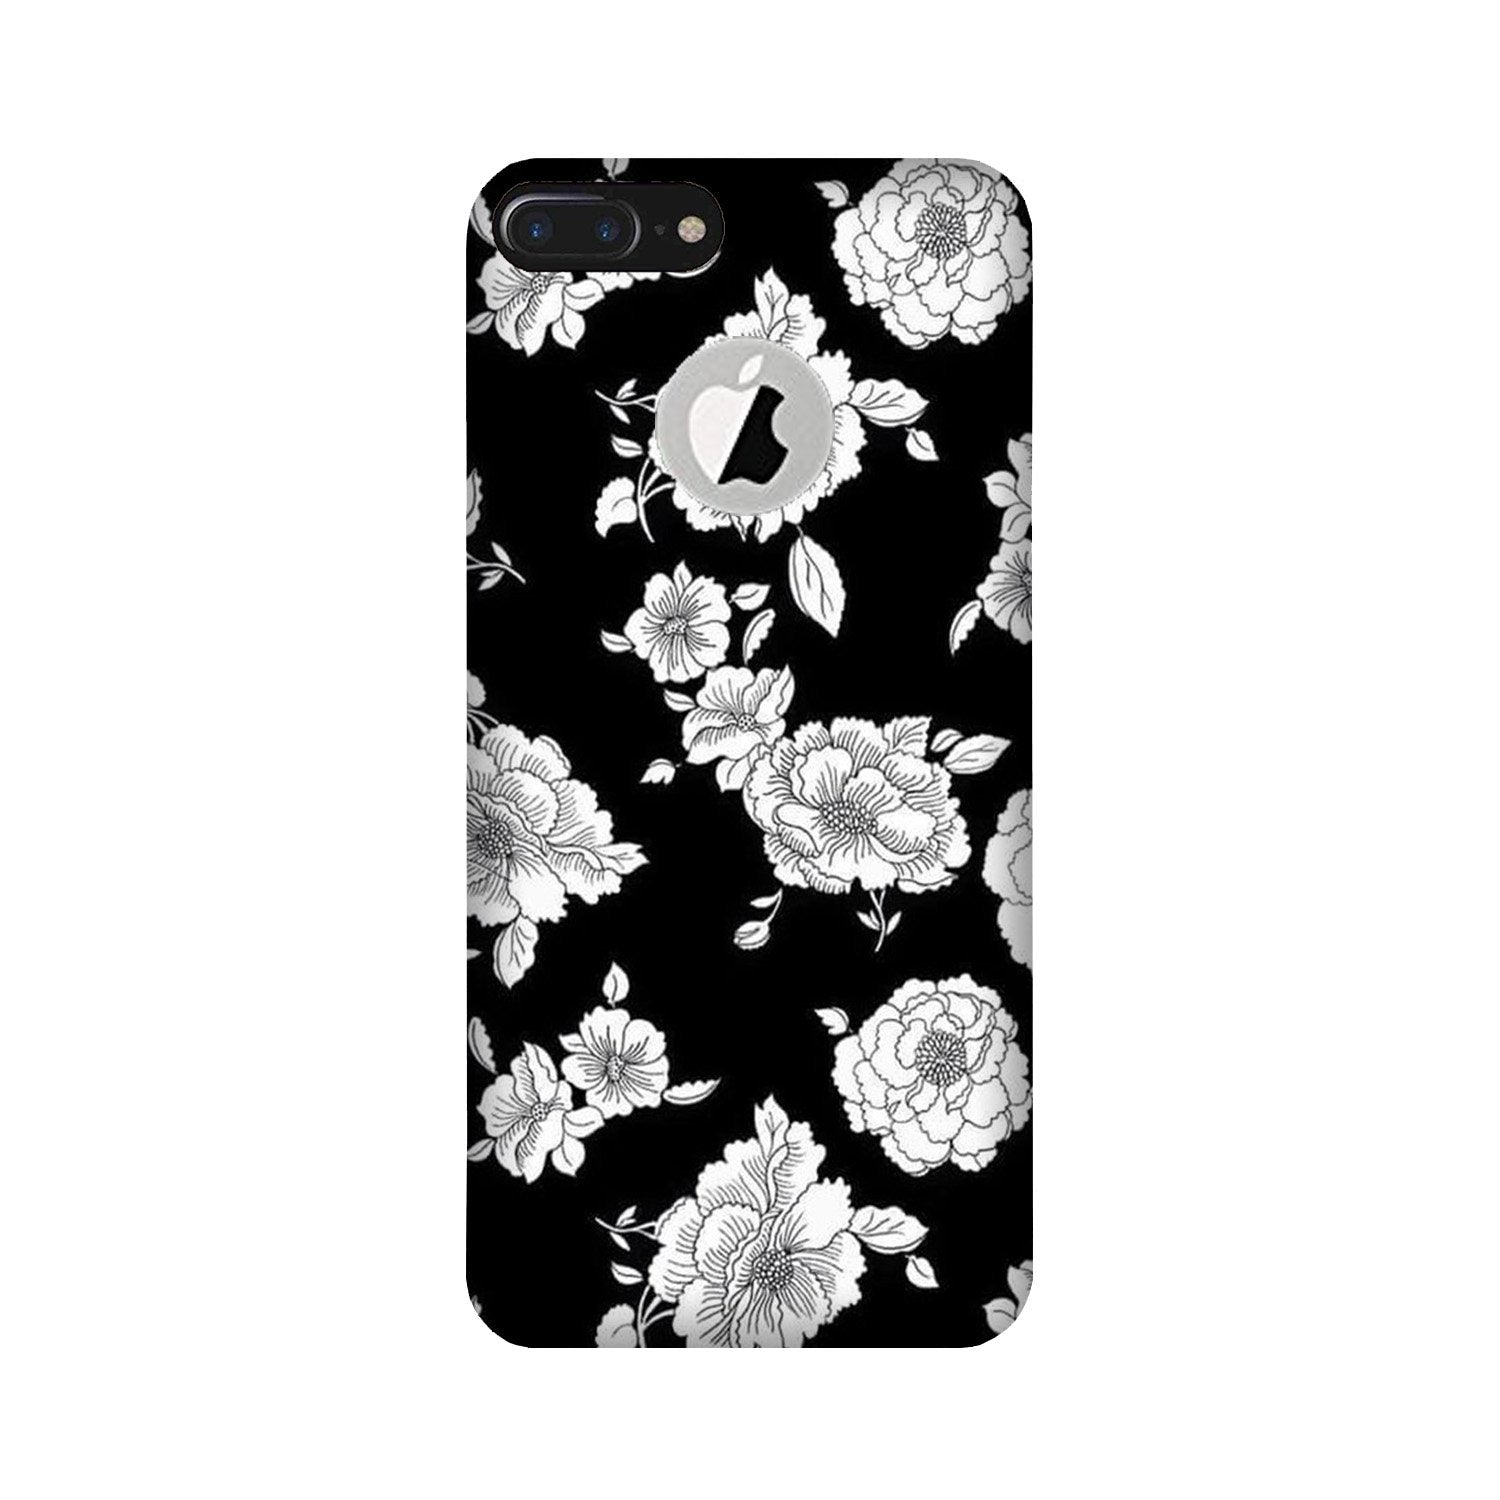 White flowers Black Background Case for iPhone 7 Plus logo cut